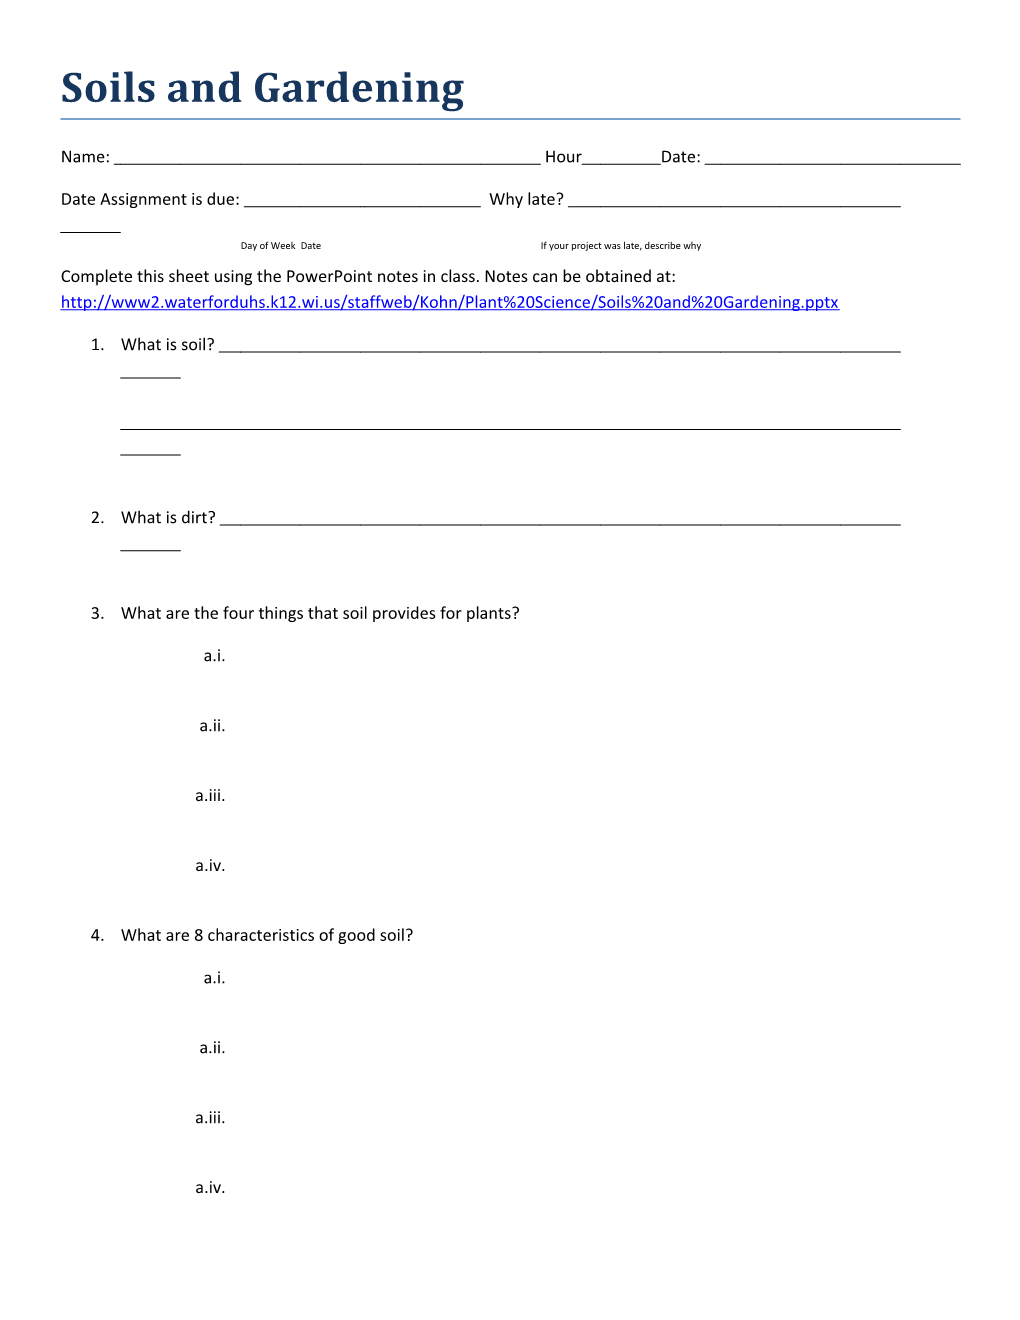 Complete This Sheet Using the Powerpoint Notes in Class. Notes Can Be Obtained At